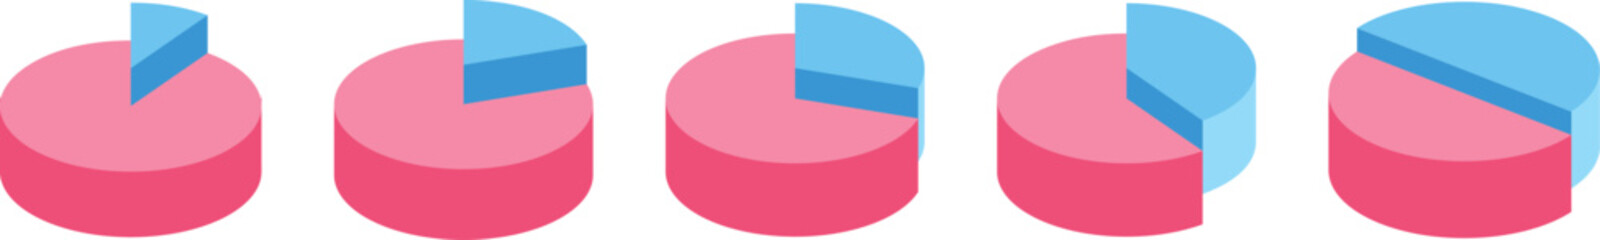 Two Sliced 3D Pie Chart Showing Various Percentages Ranging from 10 and 90, 20 and 80, 30 and 70, 40 and 60, 50 and 50 Percent